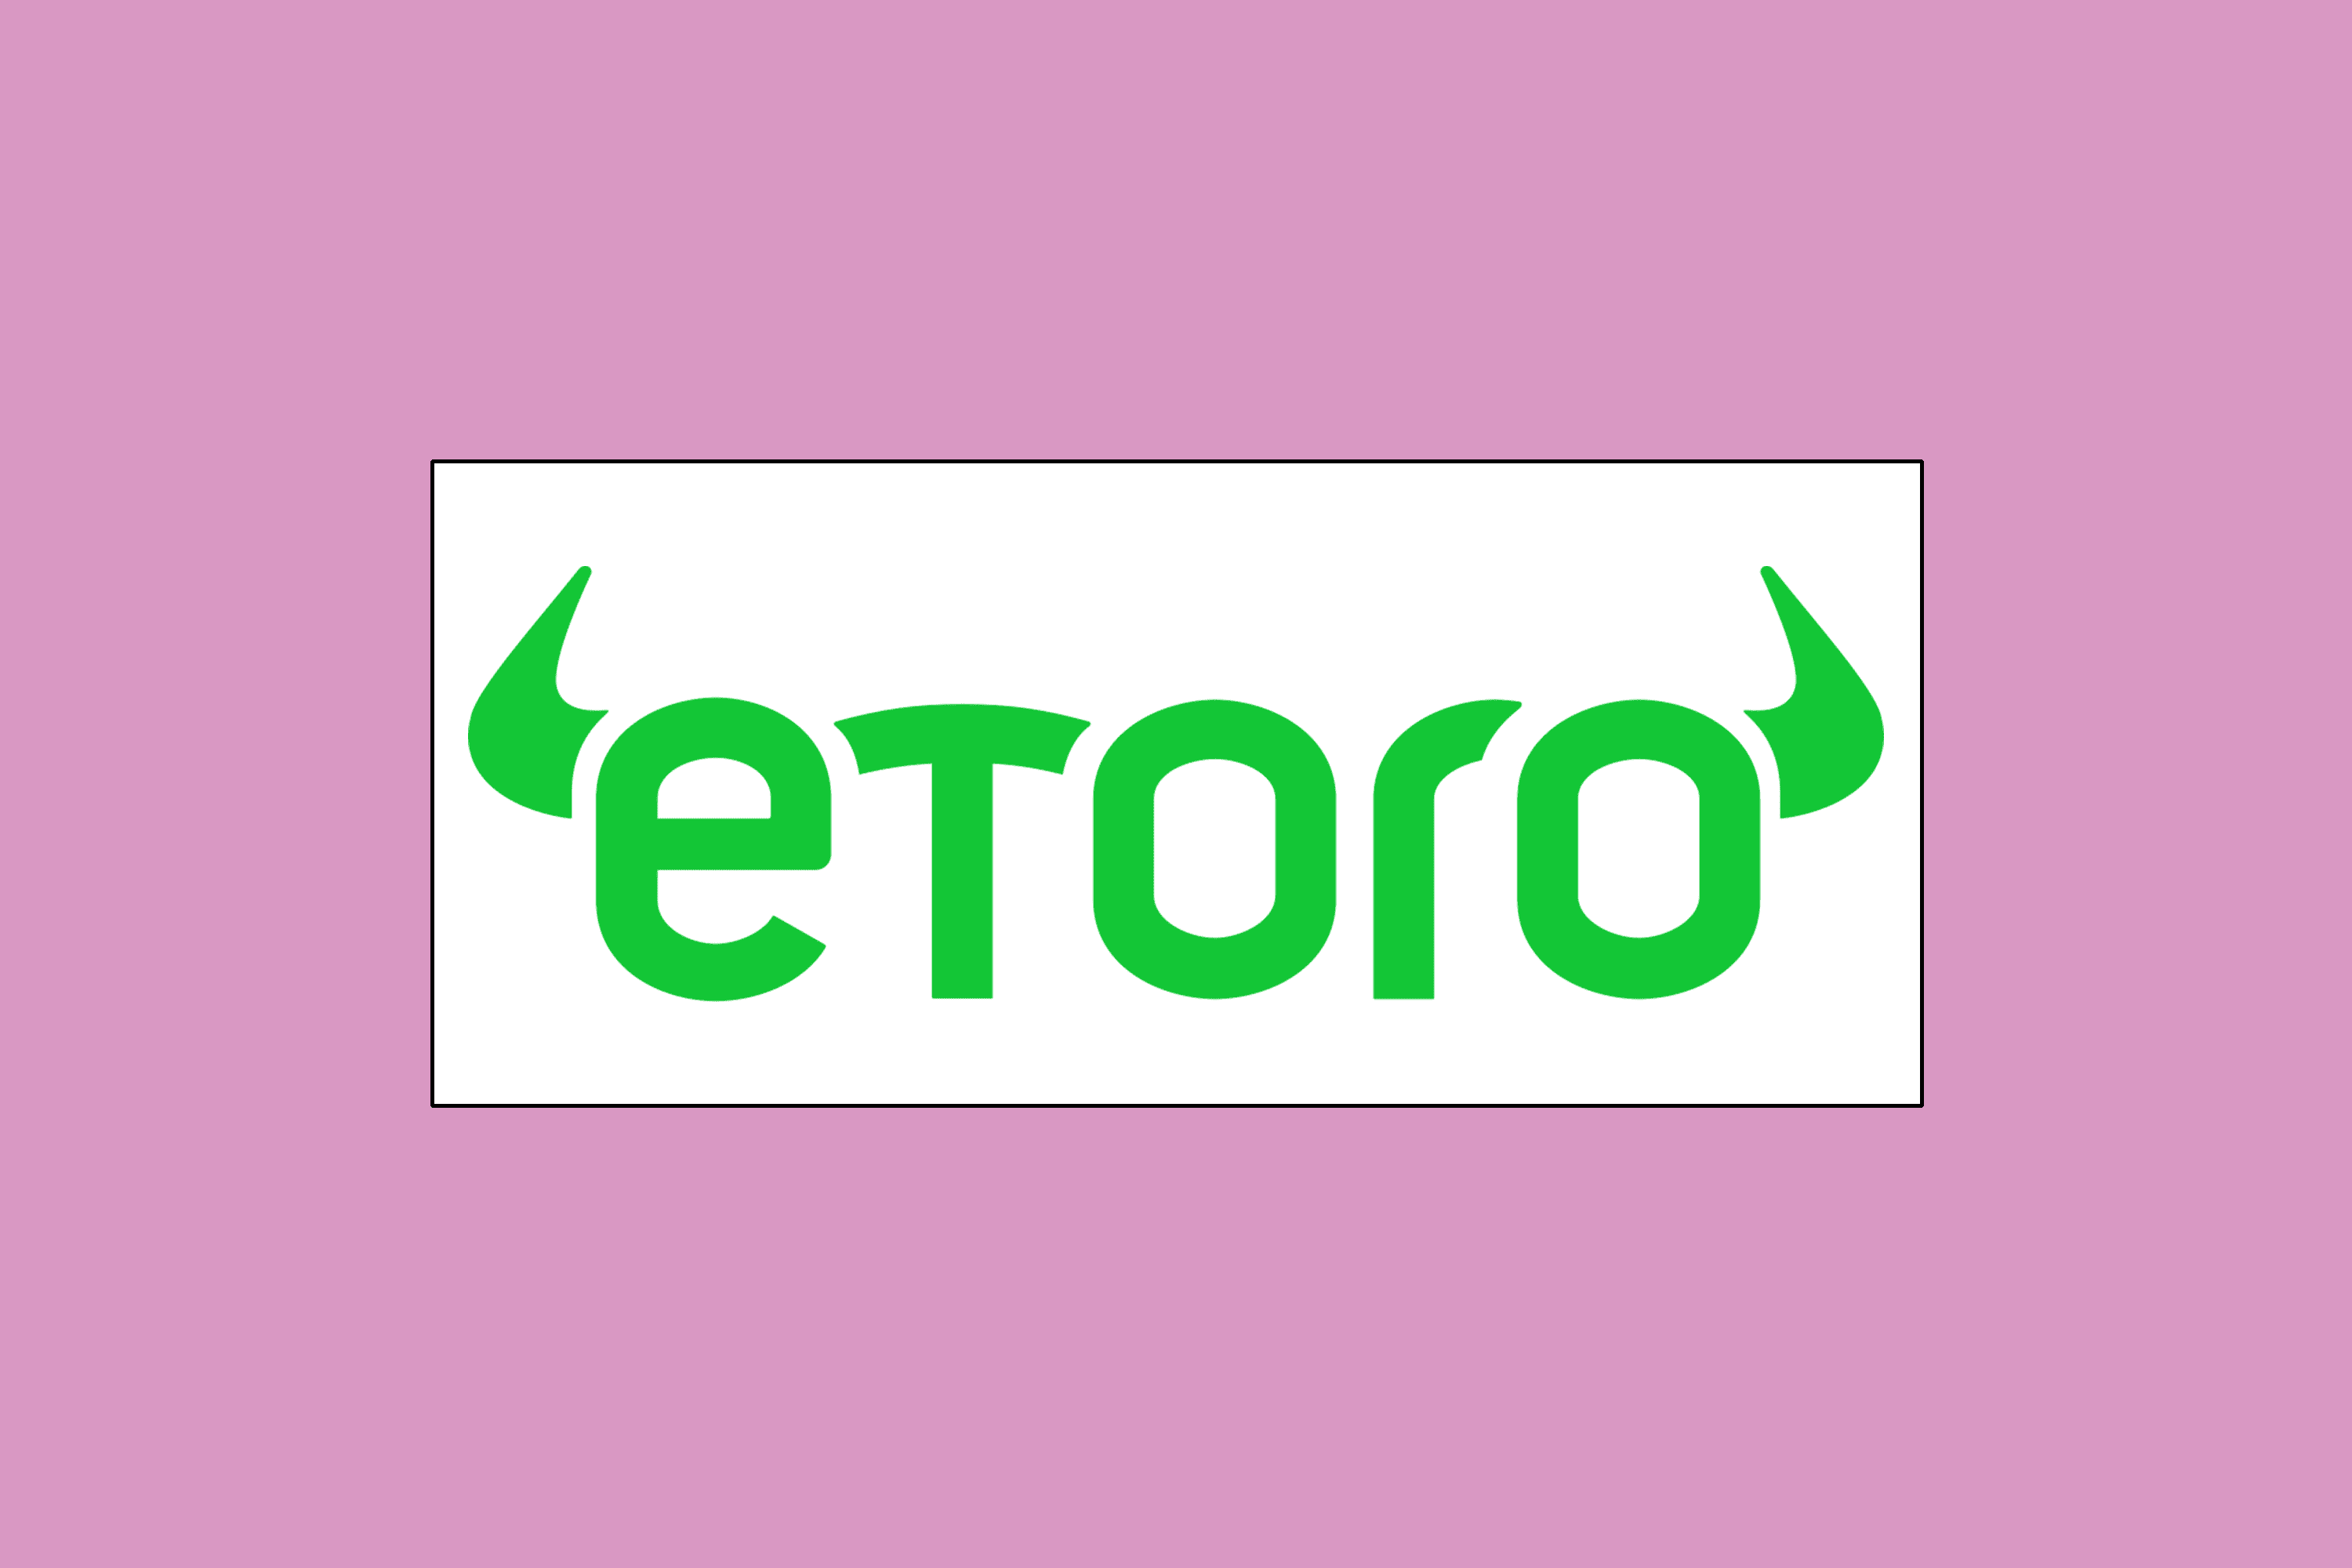 Image shows eToro logo in the center of a purple background.